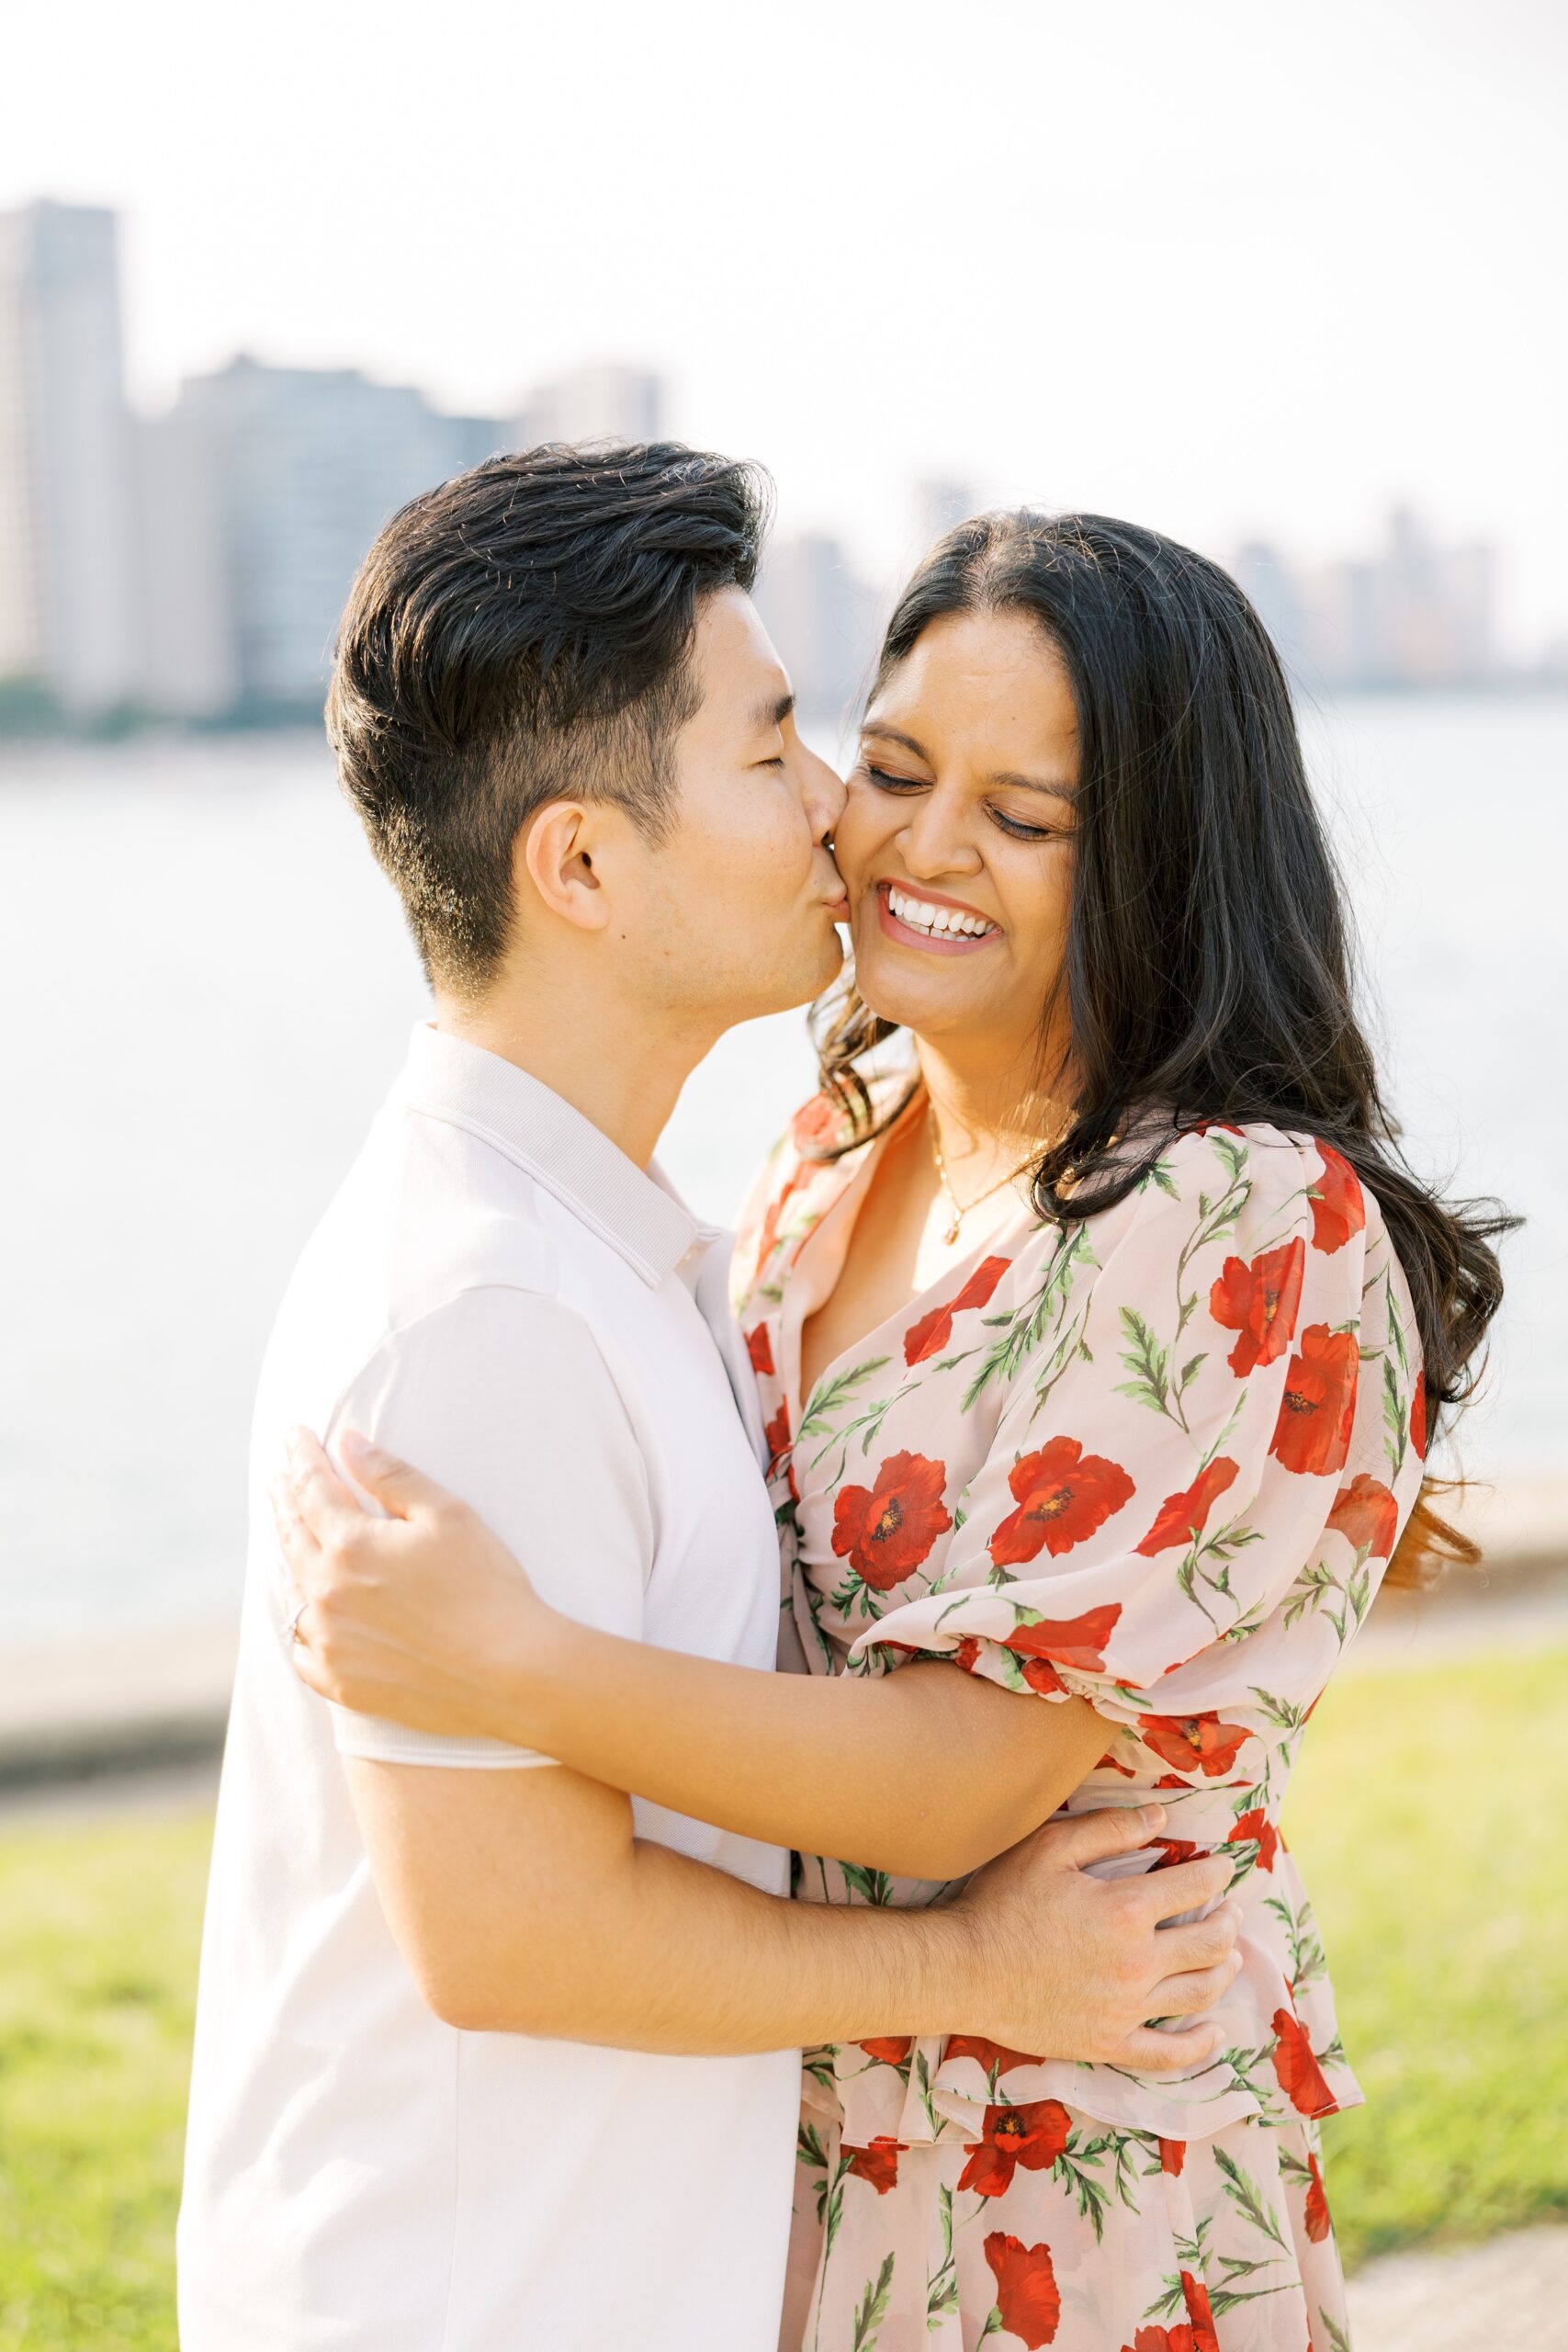 man kisses woman's cheek during outdoor engagement photos in Chicago